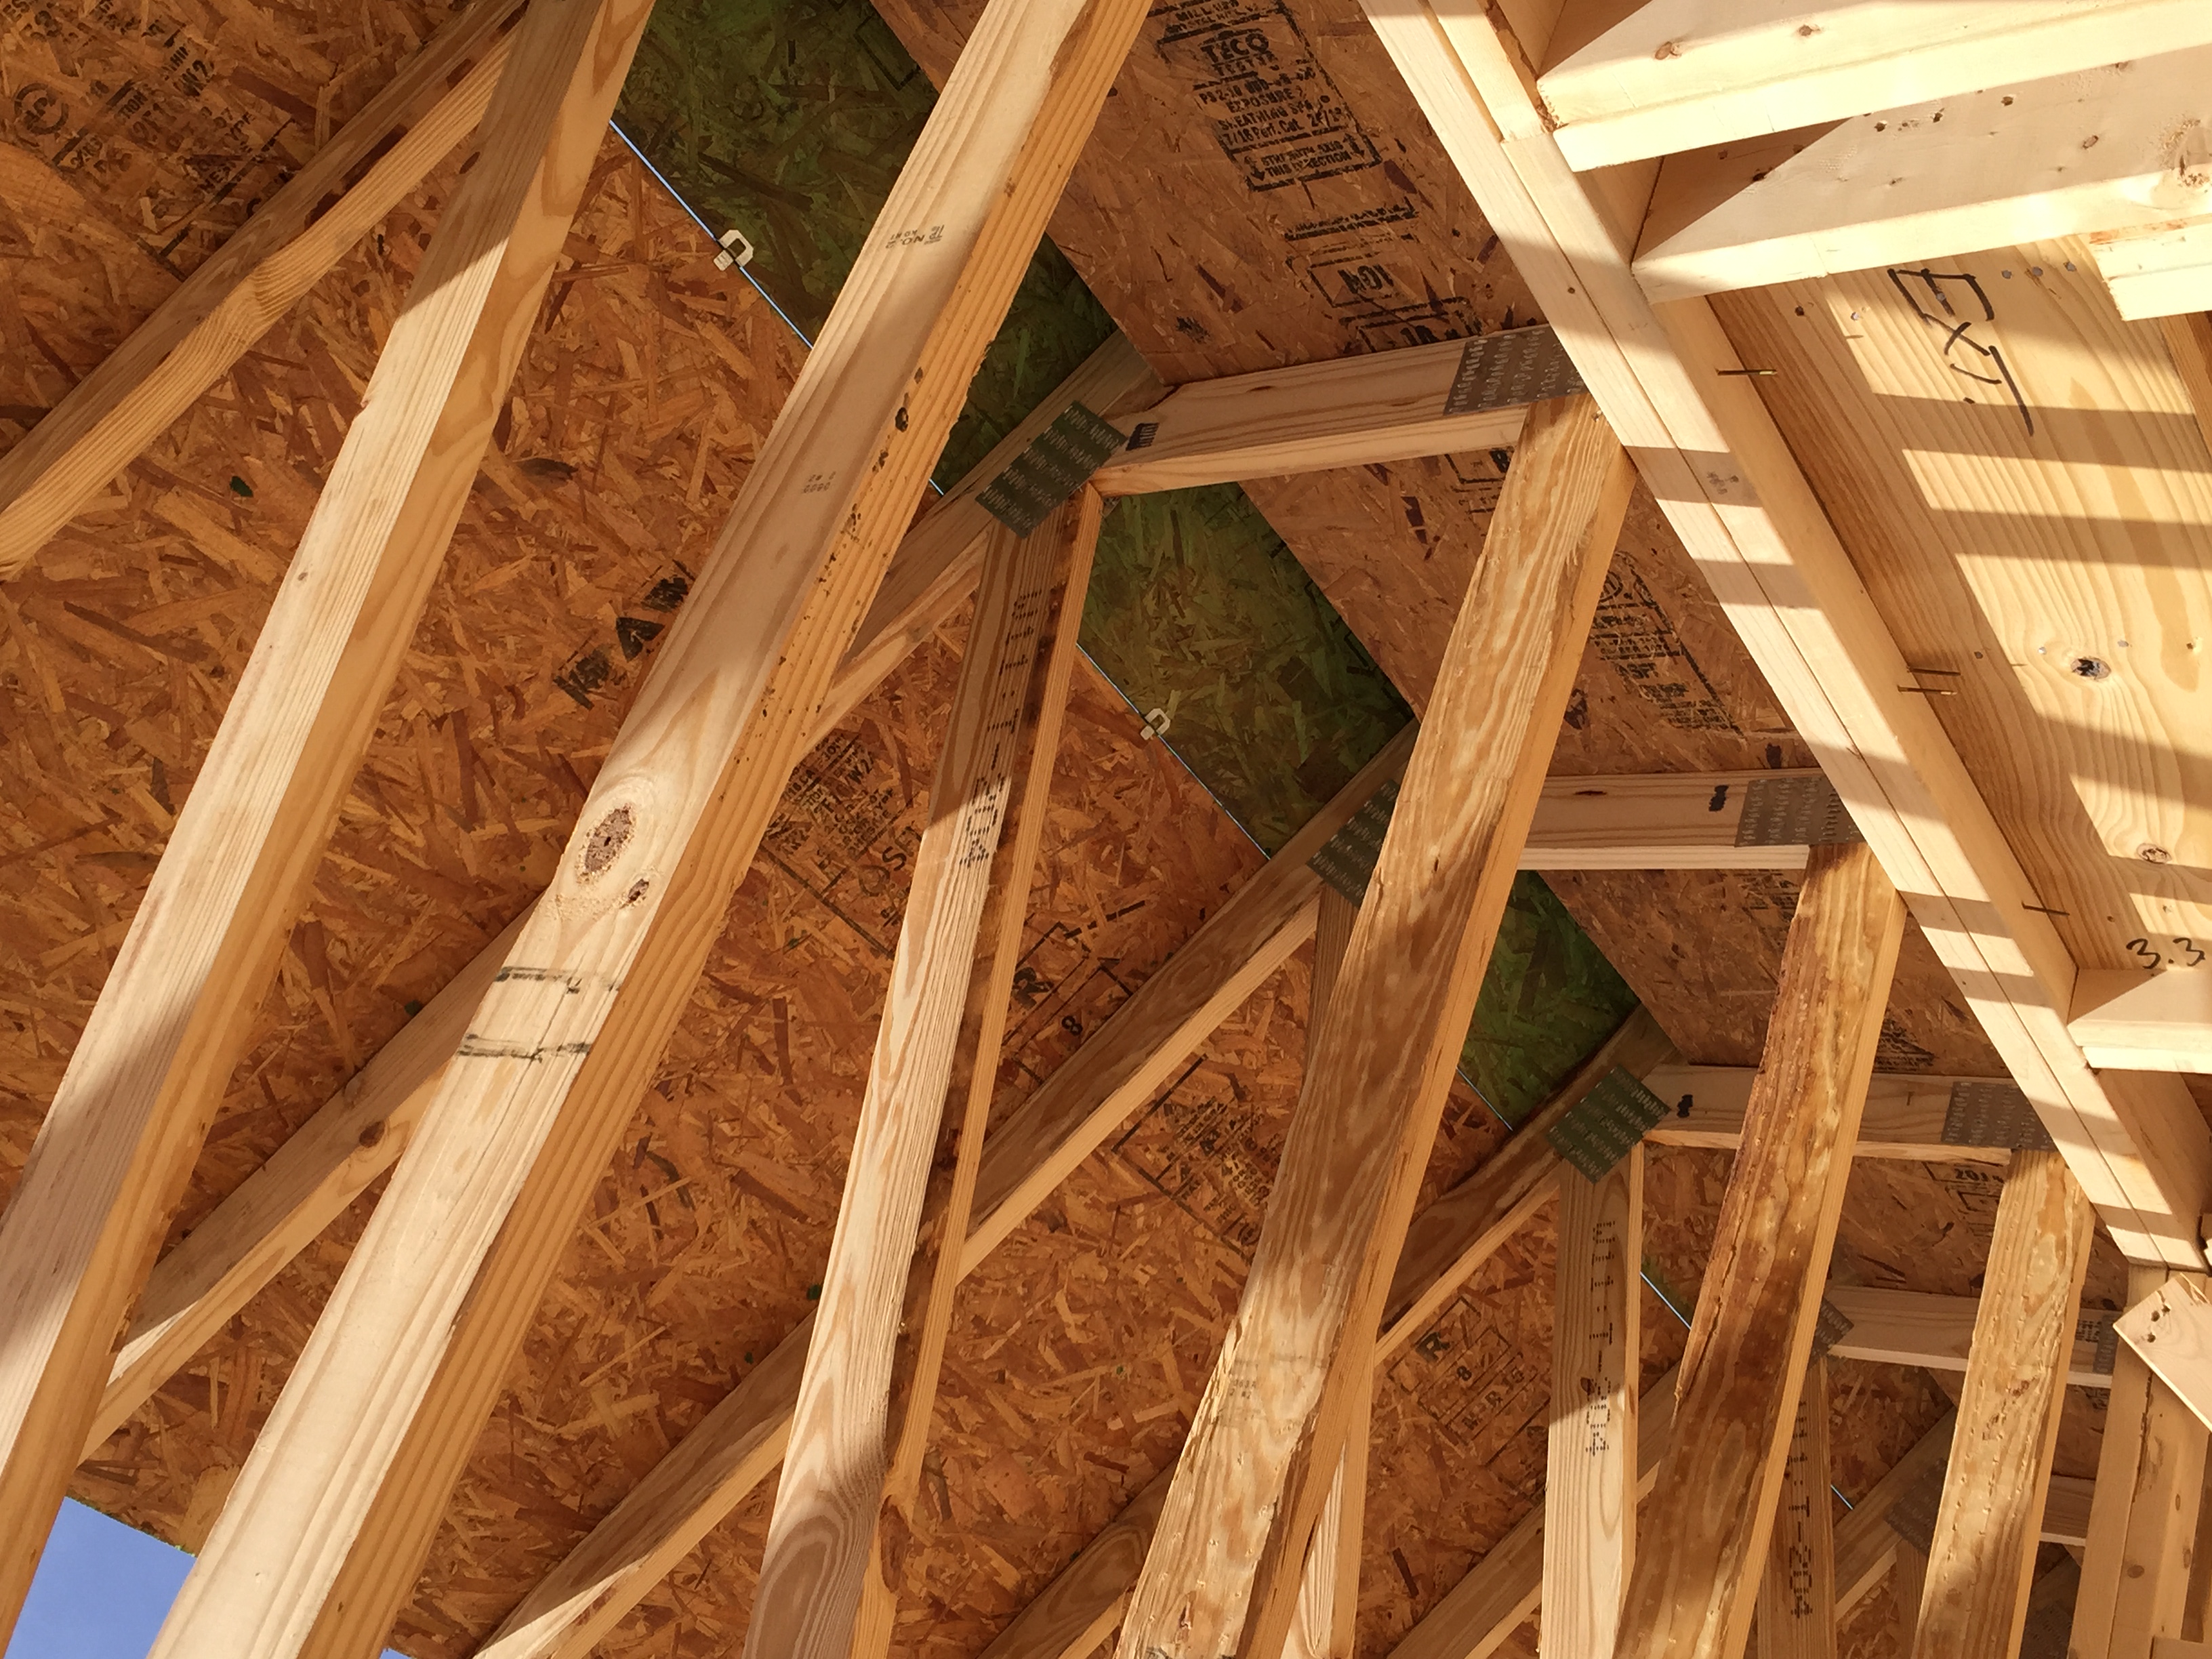 Insight Homes allows for more space than usual under its trusses so it can install thicker insulation.